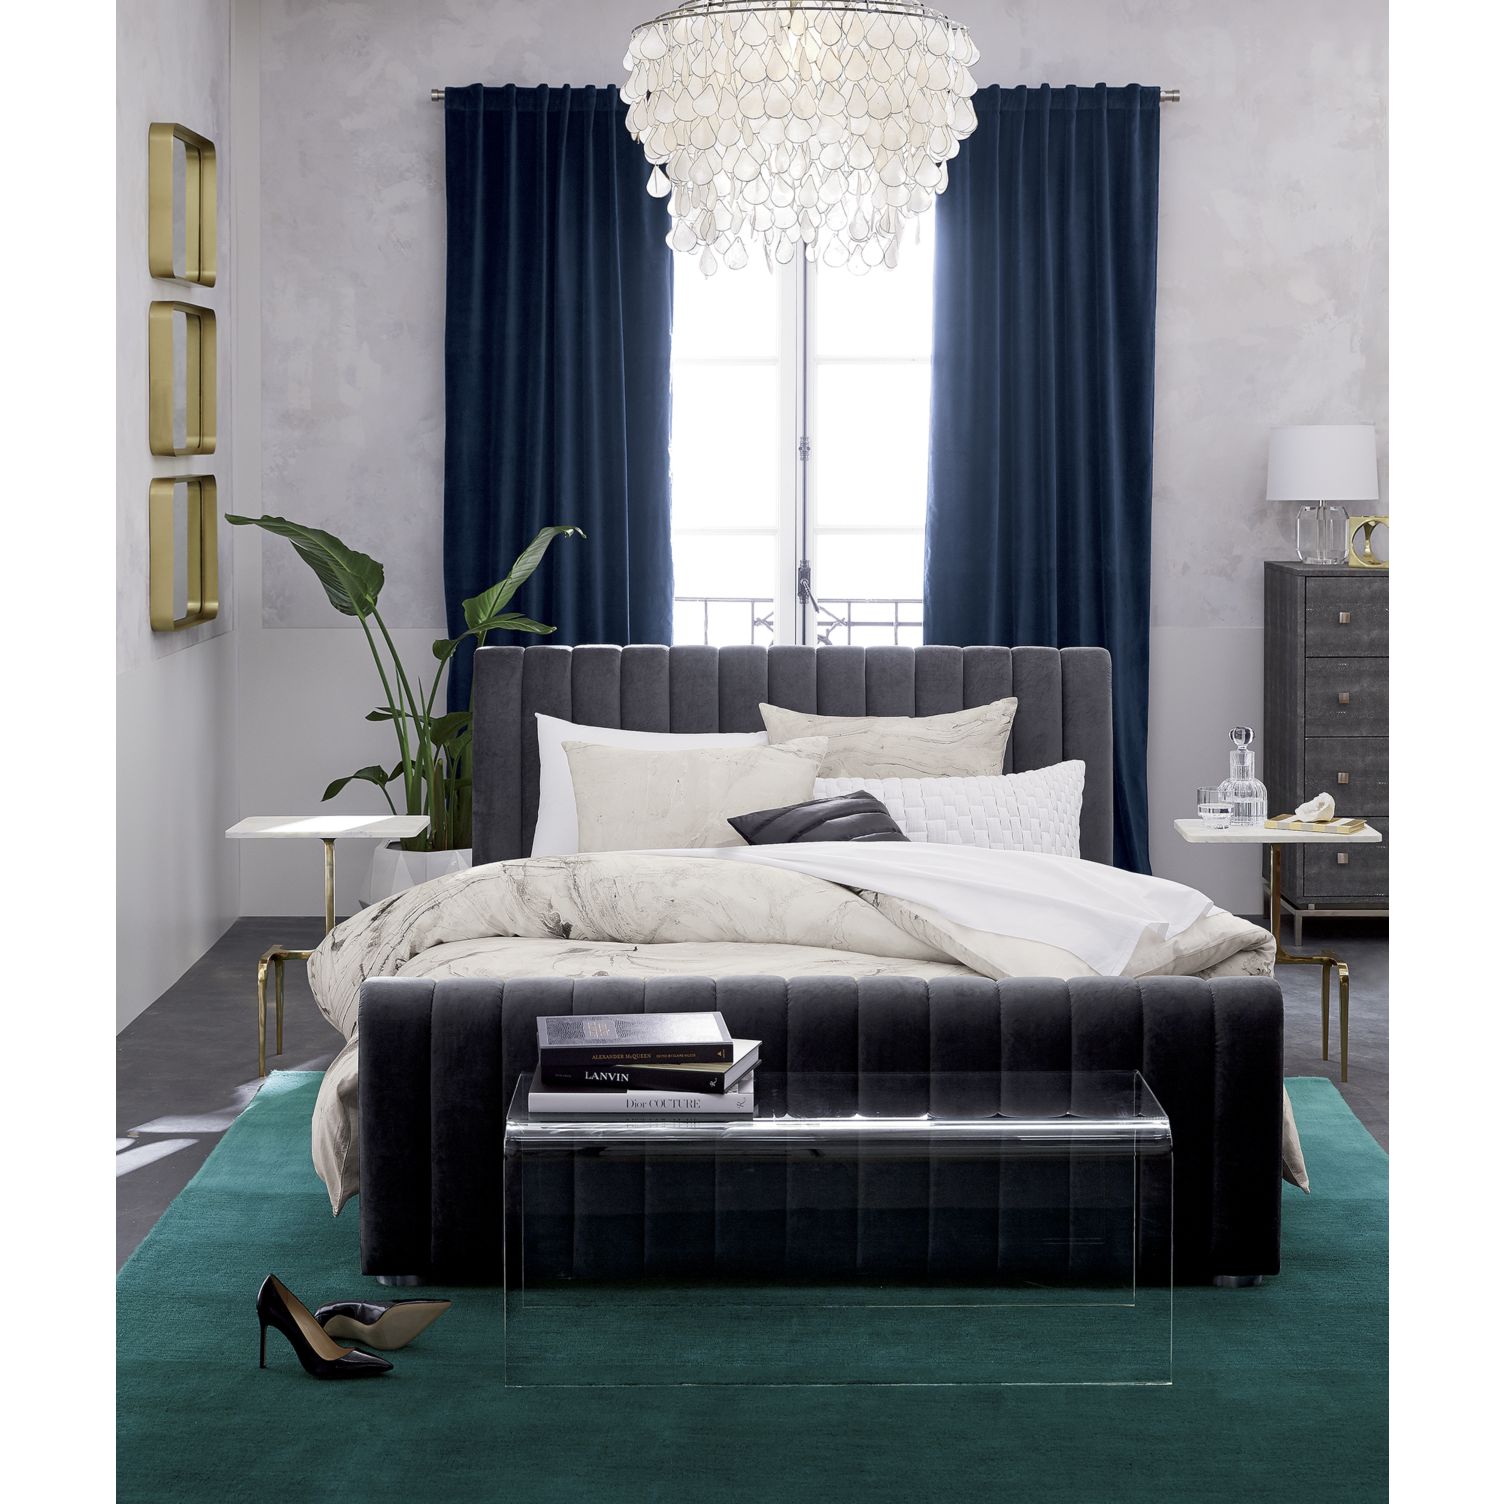 Ombre-teal-rug-in-a-luxe-bedroom